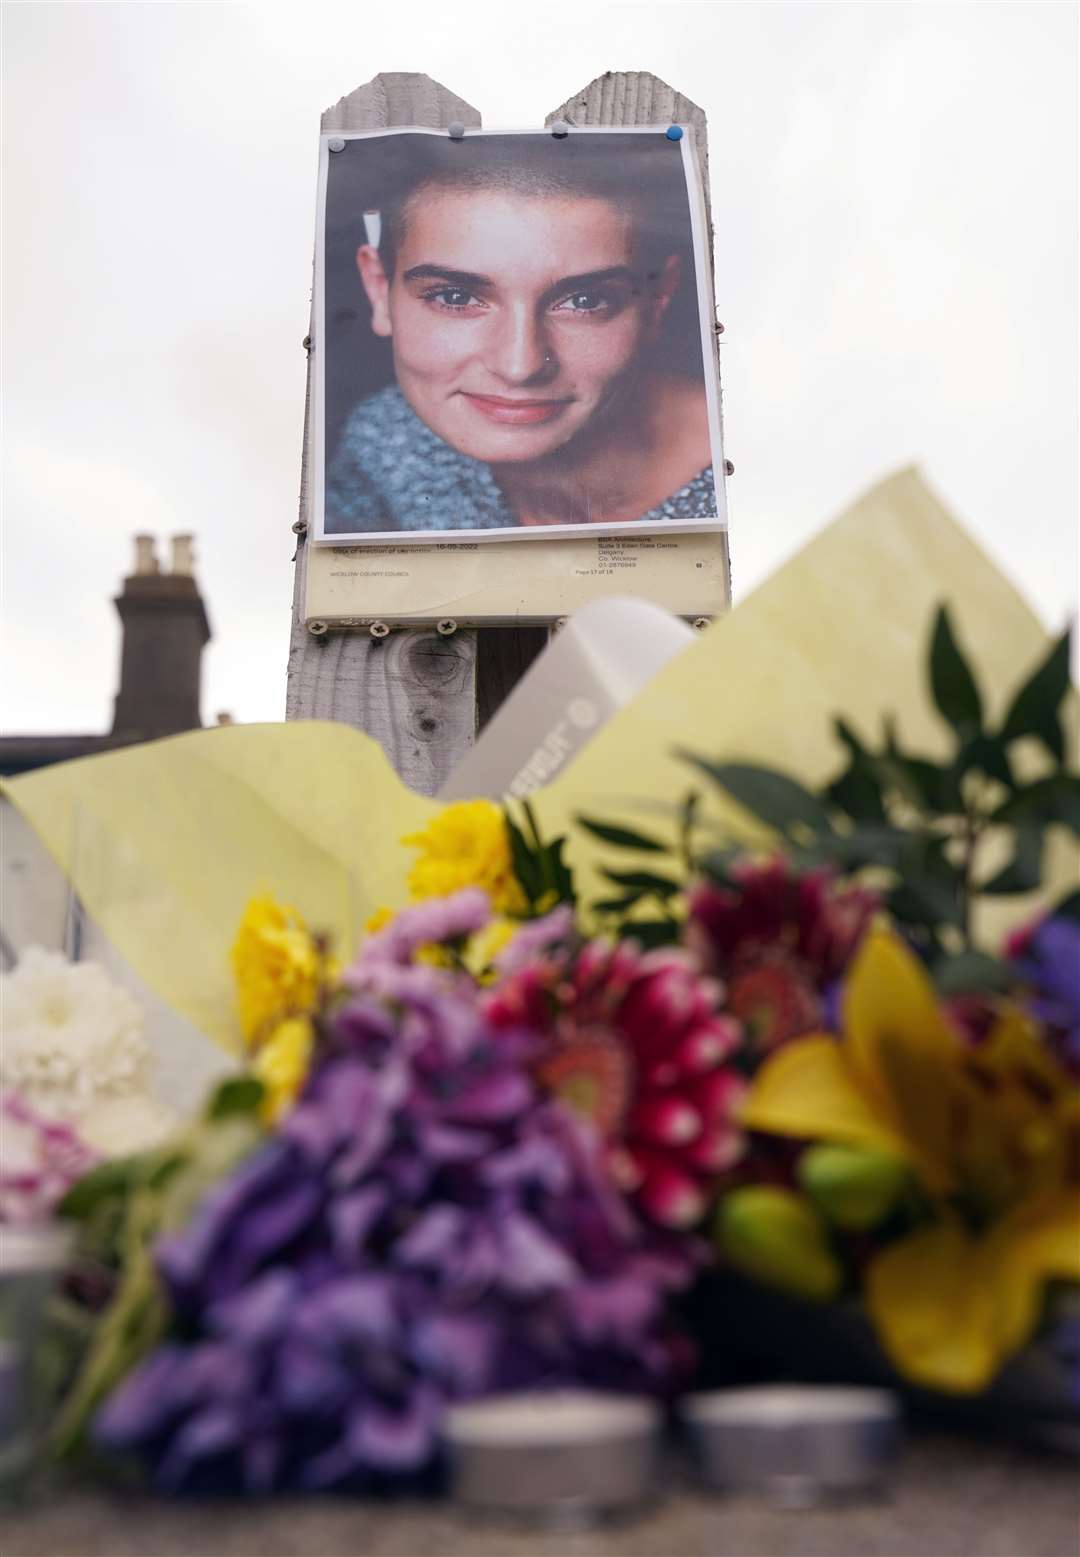 Floral tributes laid outside Sinead O’Connor’s former home in Bray, Co Wicklow (Brian Lawless/PA)